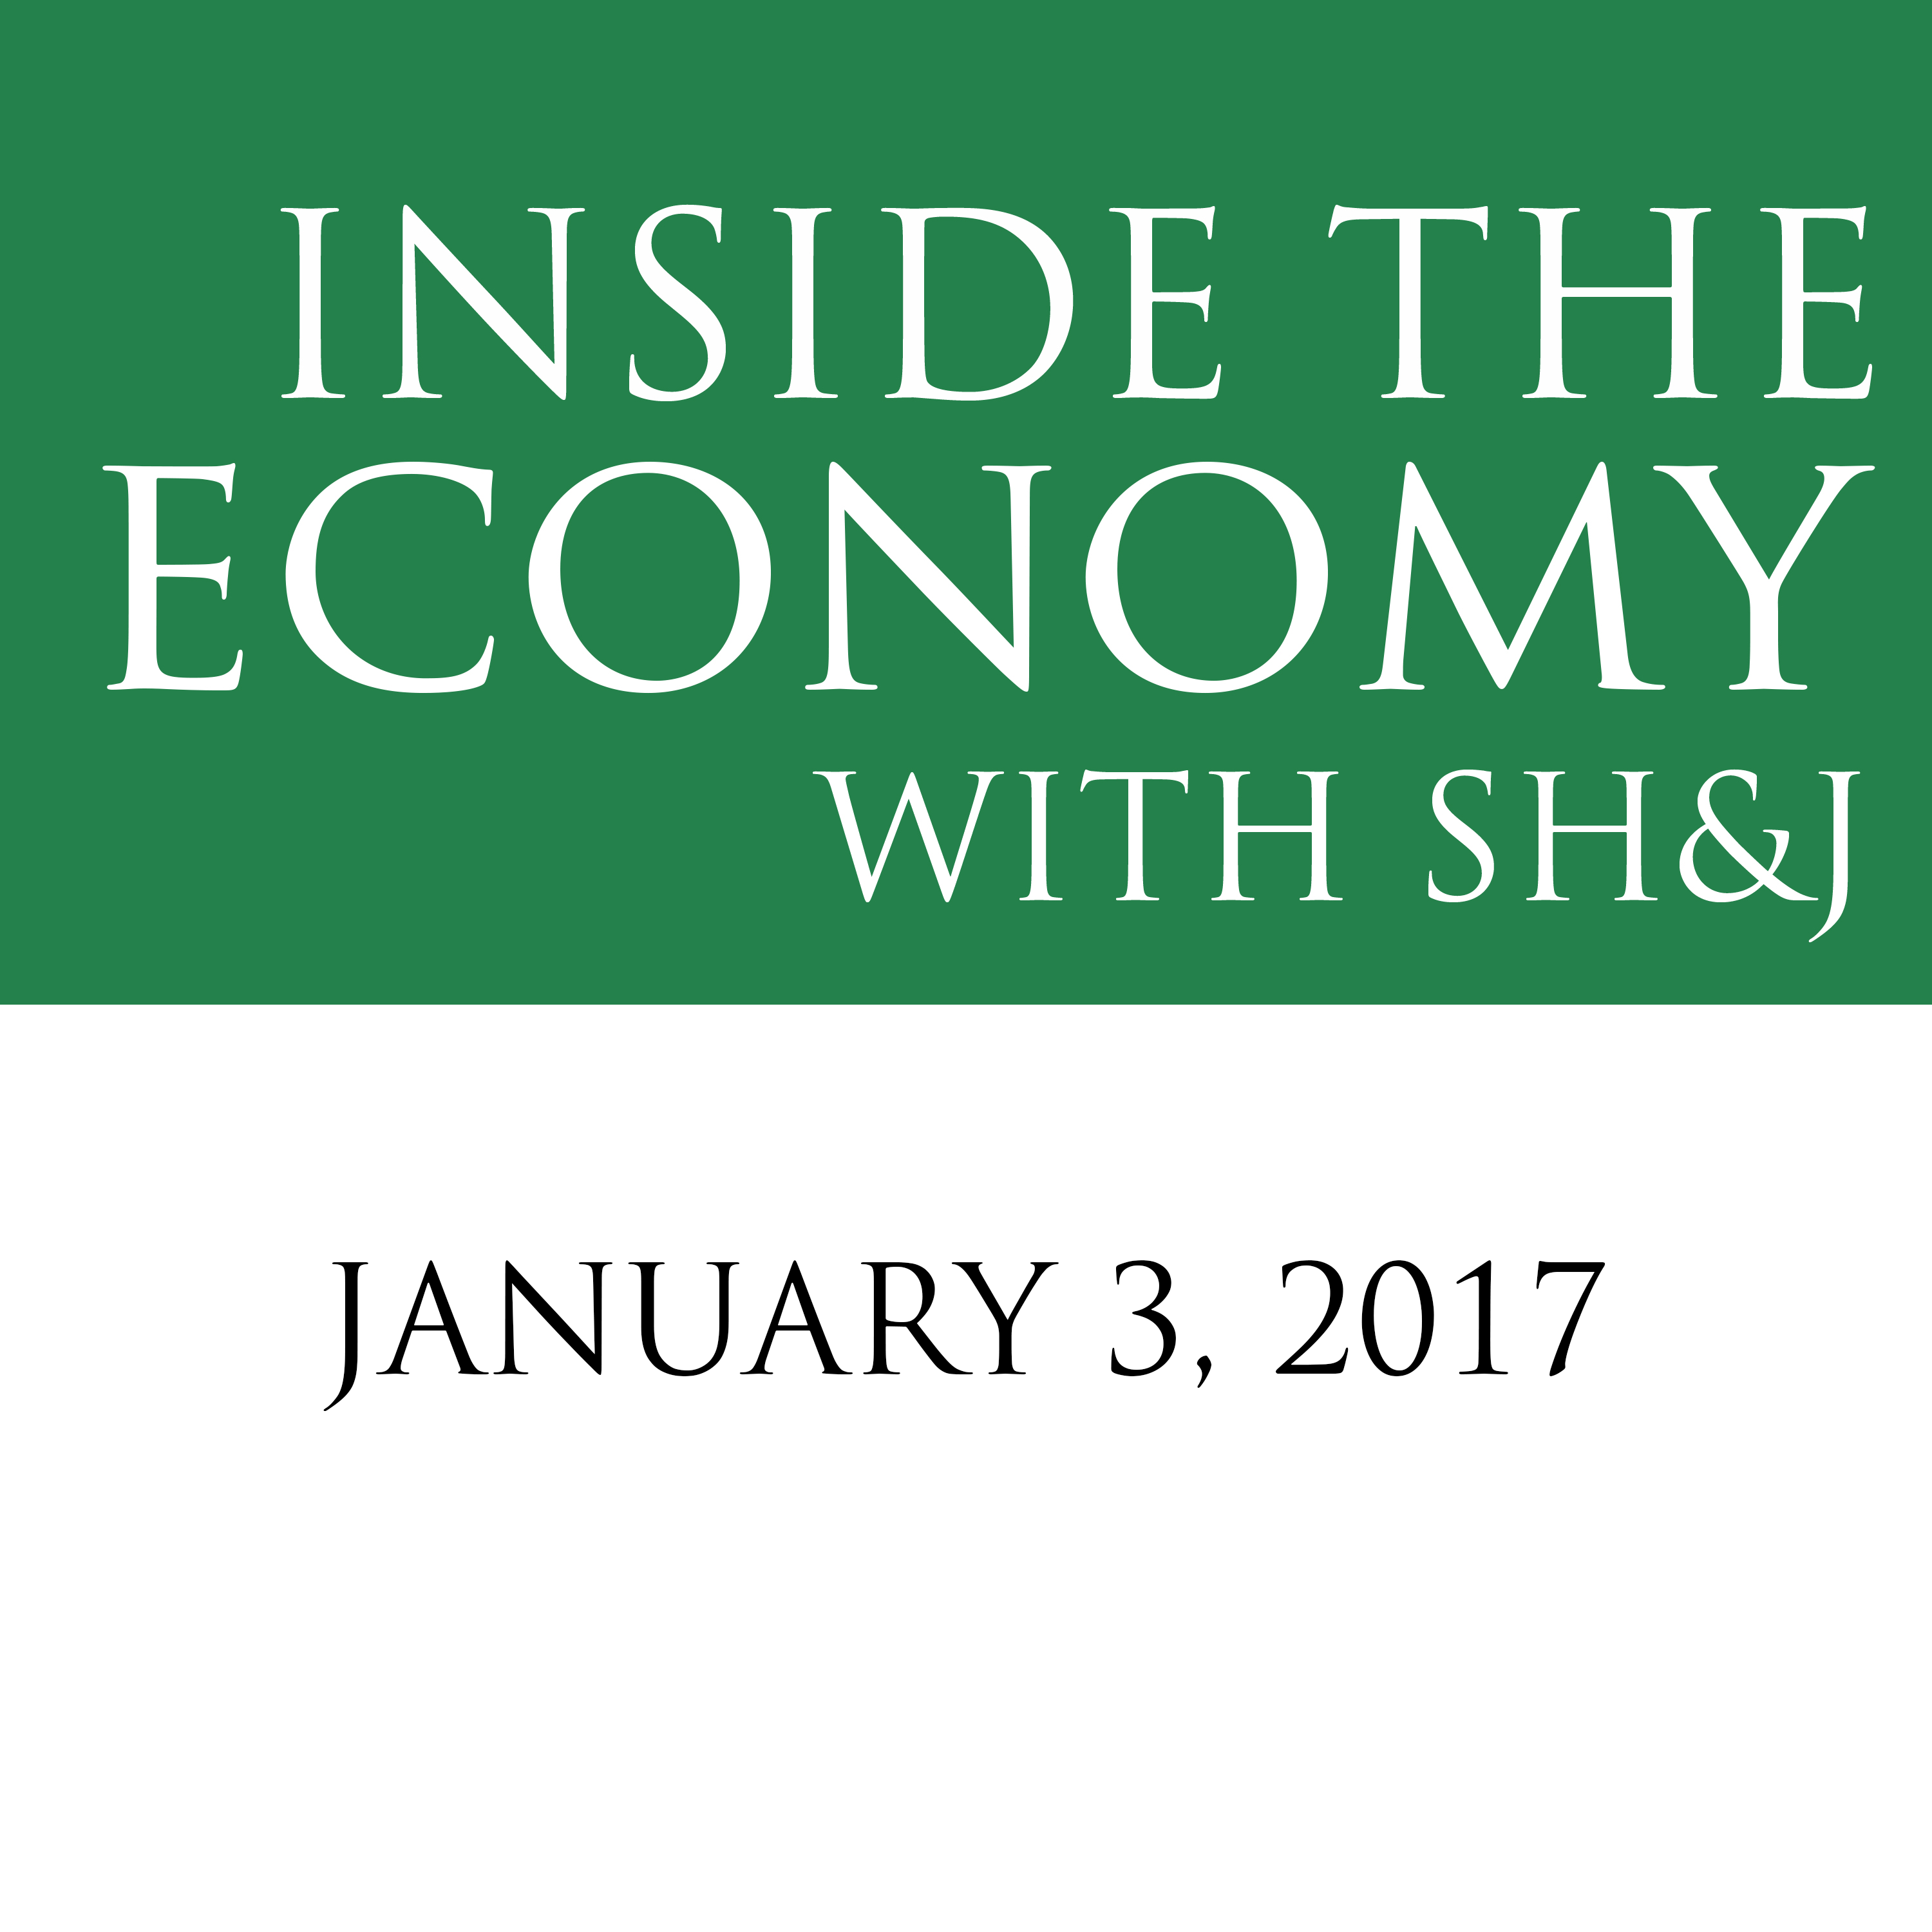 January 3, 2017  --  Inside the Economy with SH&J